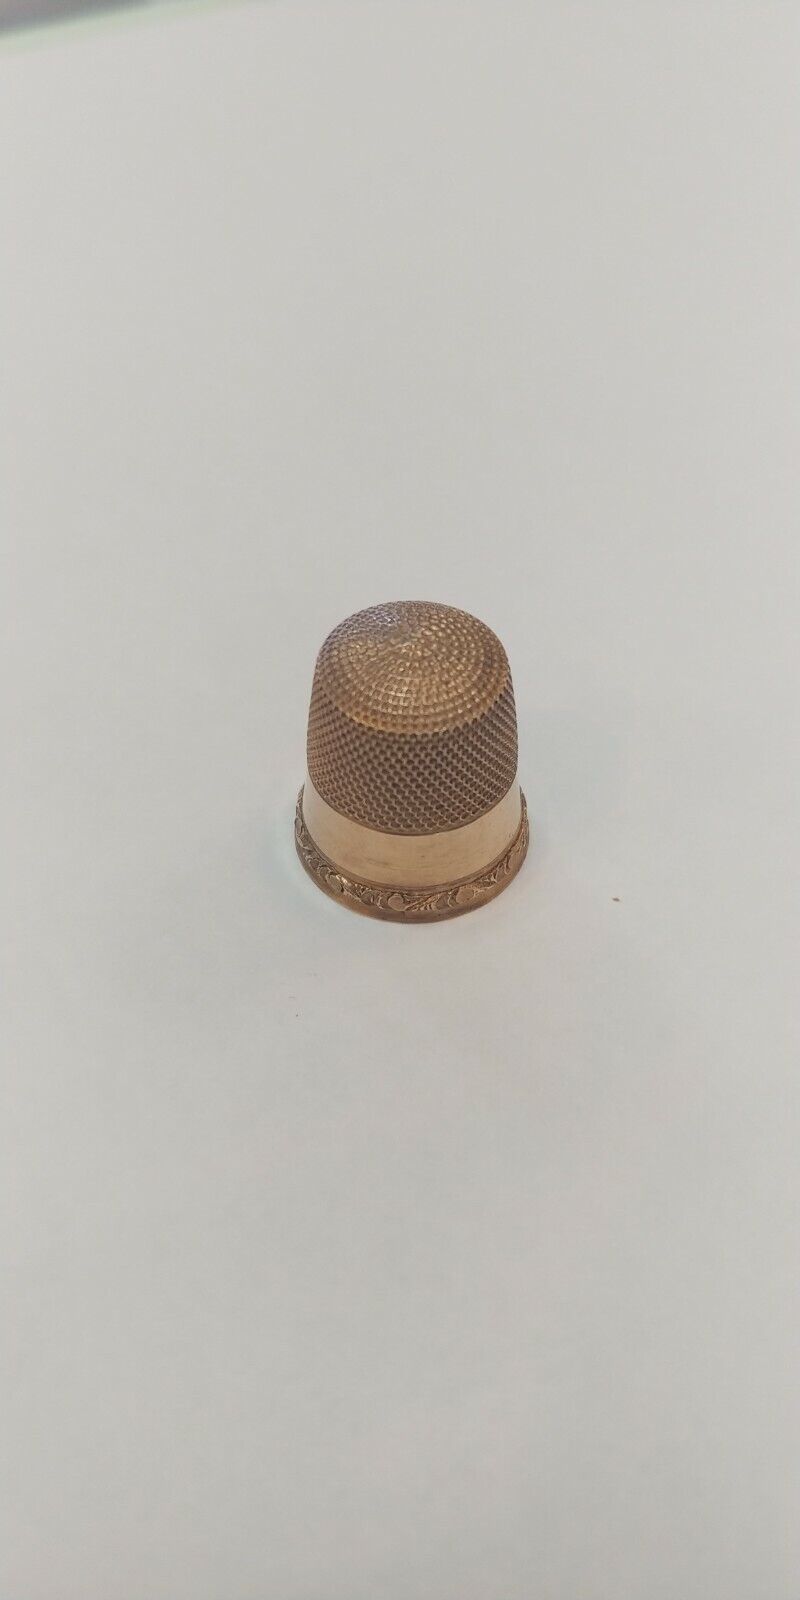 10k Solid Yellow Gold Thimble